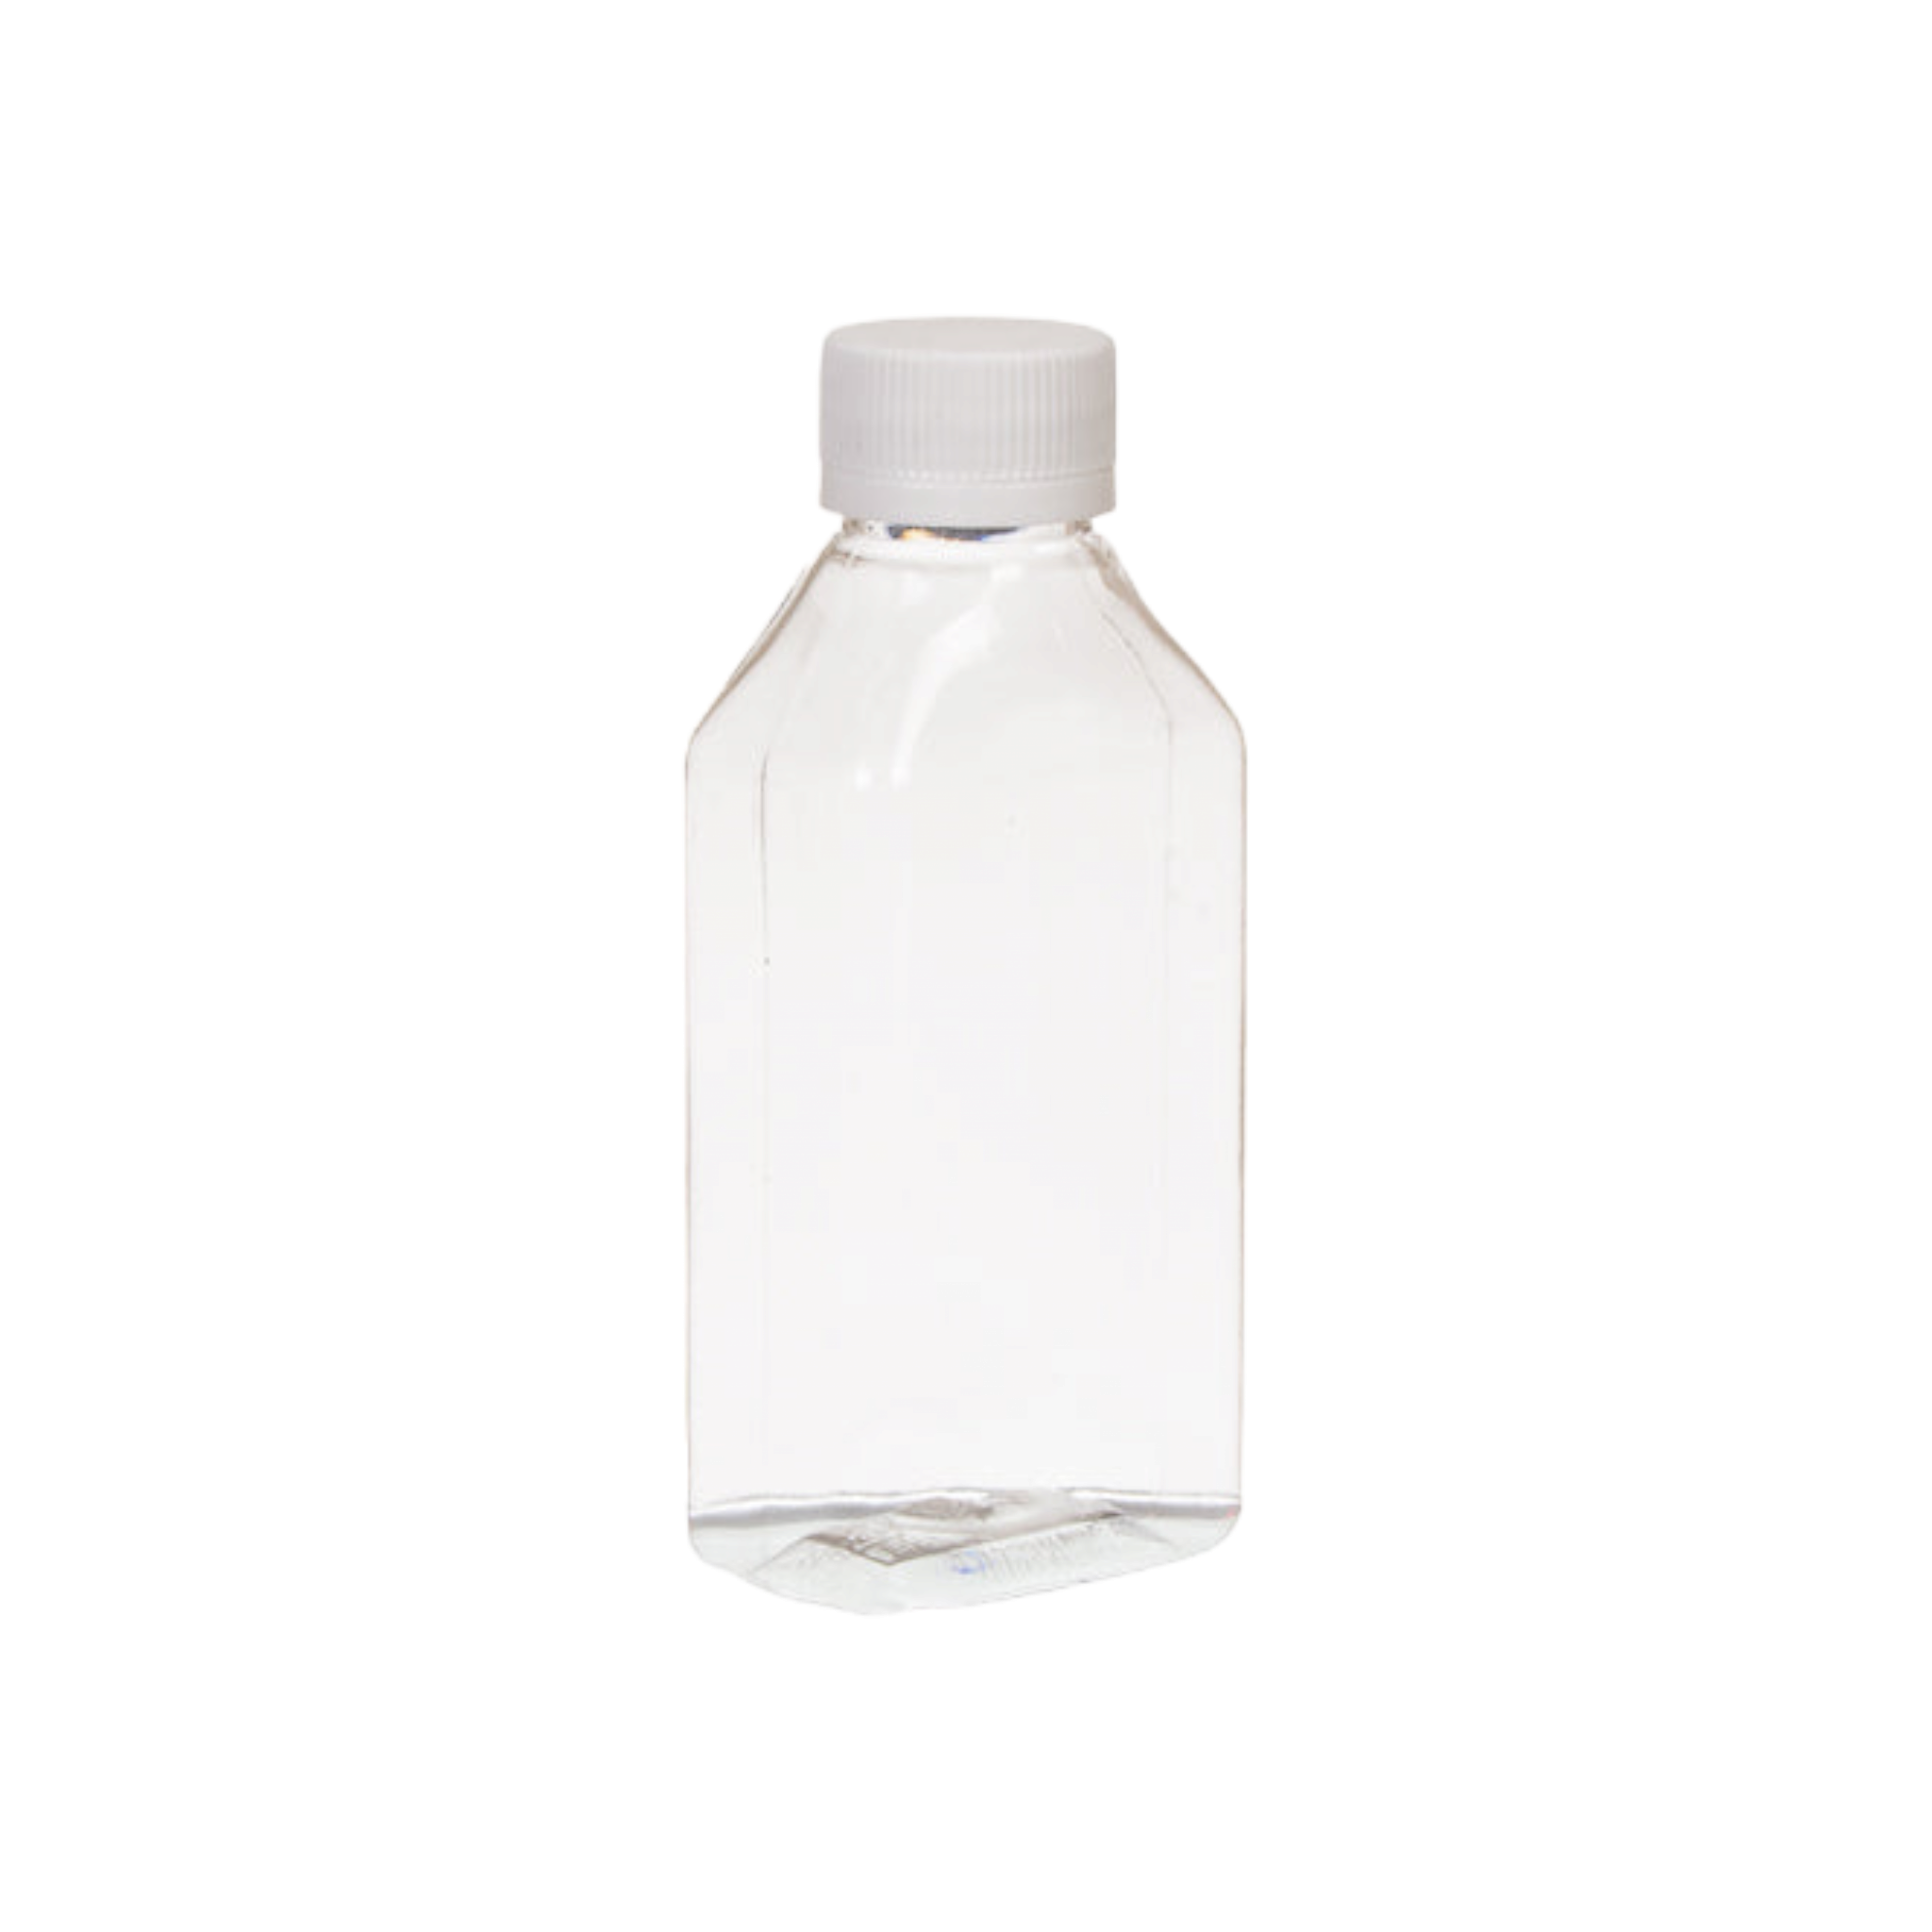 100ml PET Medical Bottle Rectangle Clear Plastic with White 24mm Screw Cap